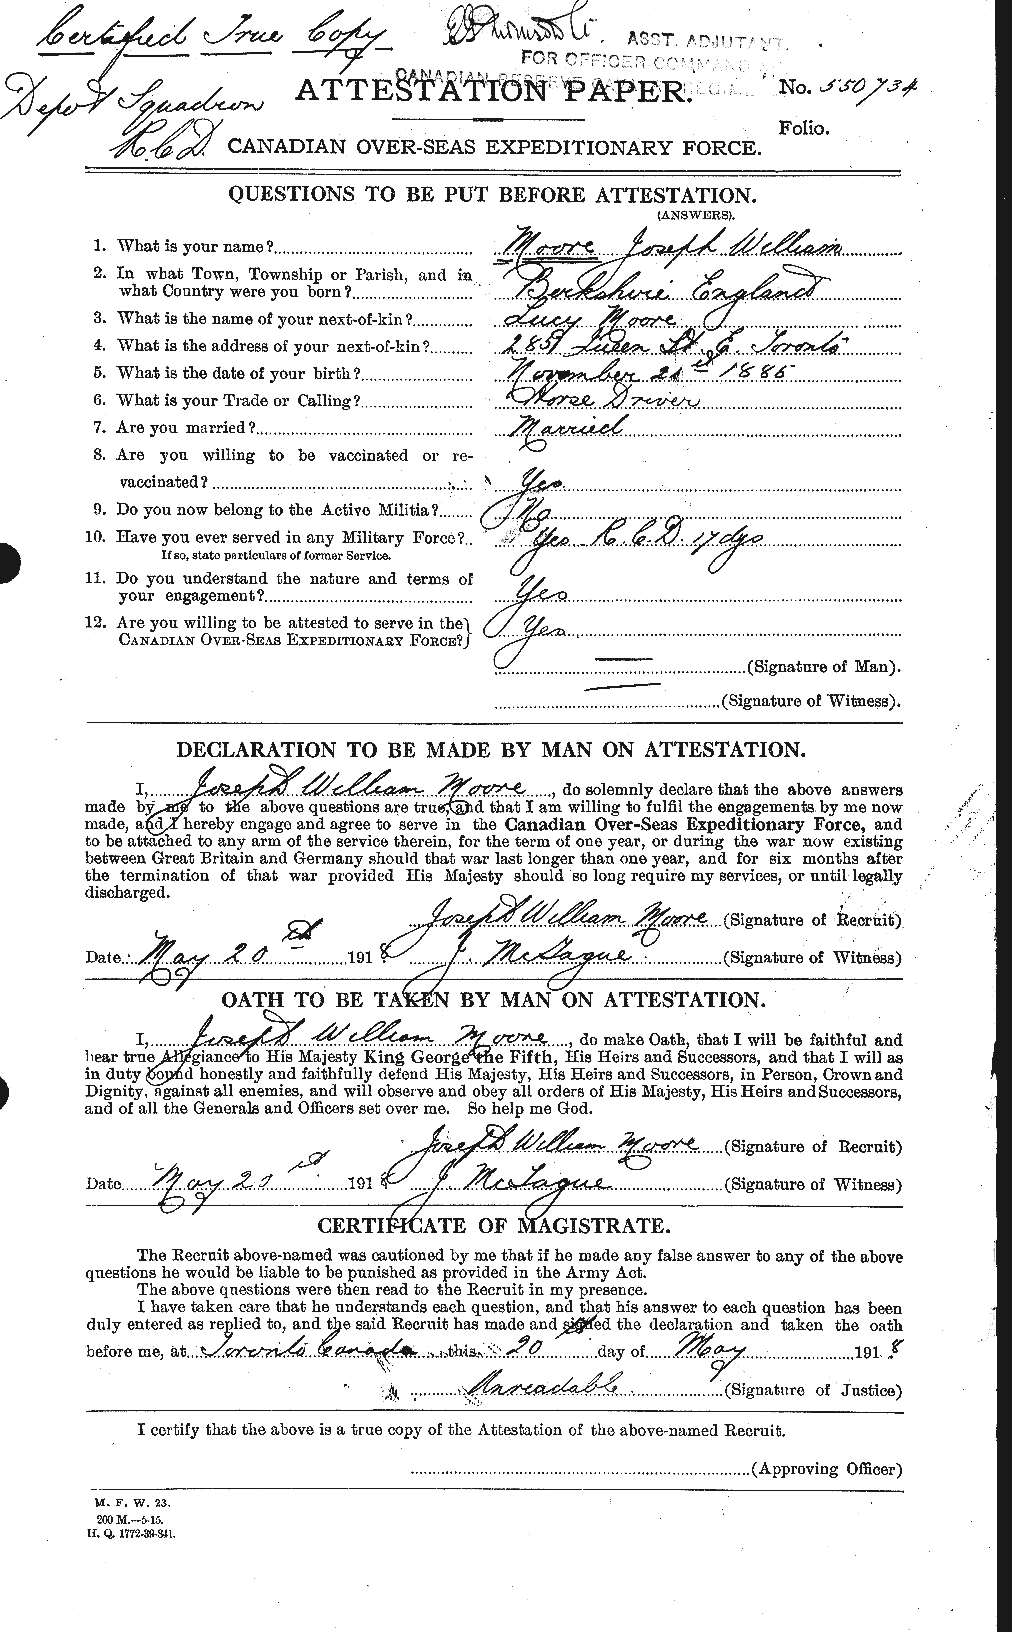 Personnel Records of the First World War - CEF 503382a